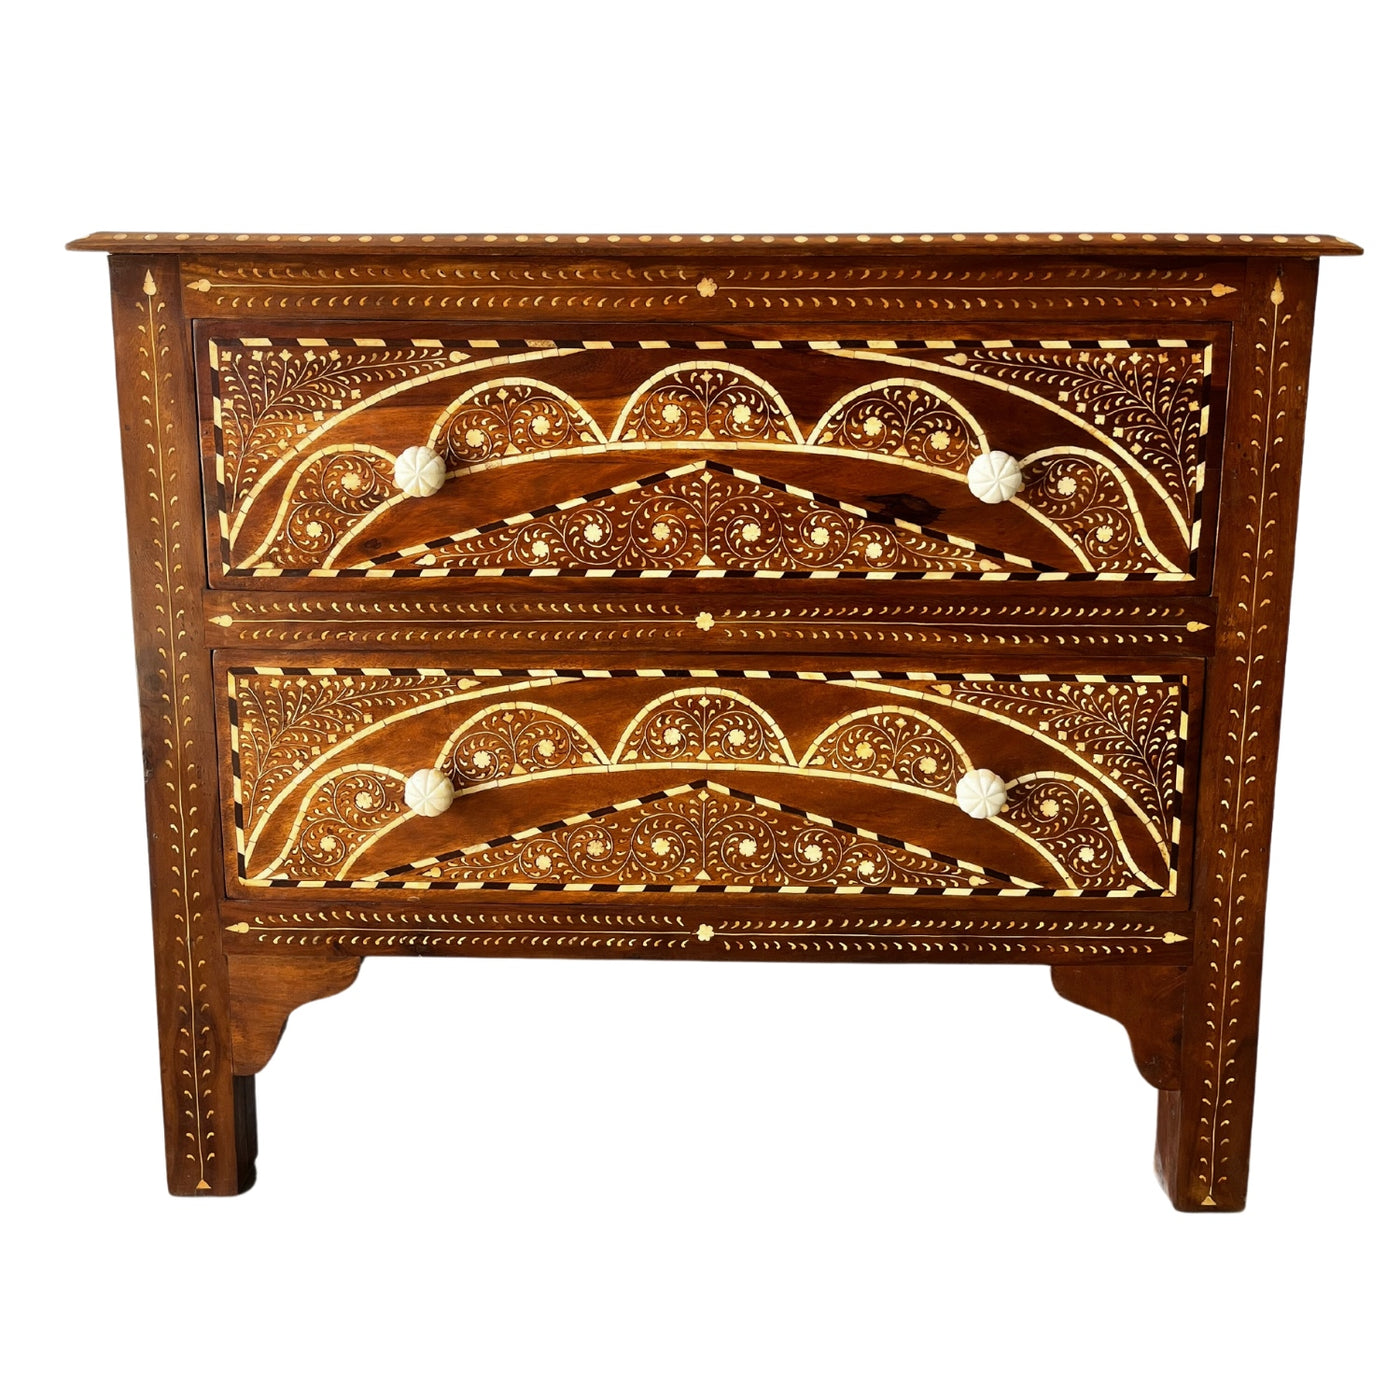 Chest of drawers in tones of chestnut and black with inlay detailing and four bone scalloped knobs